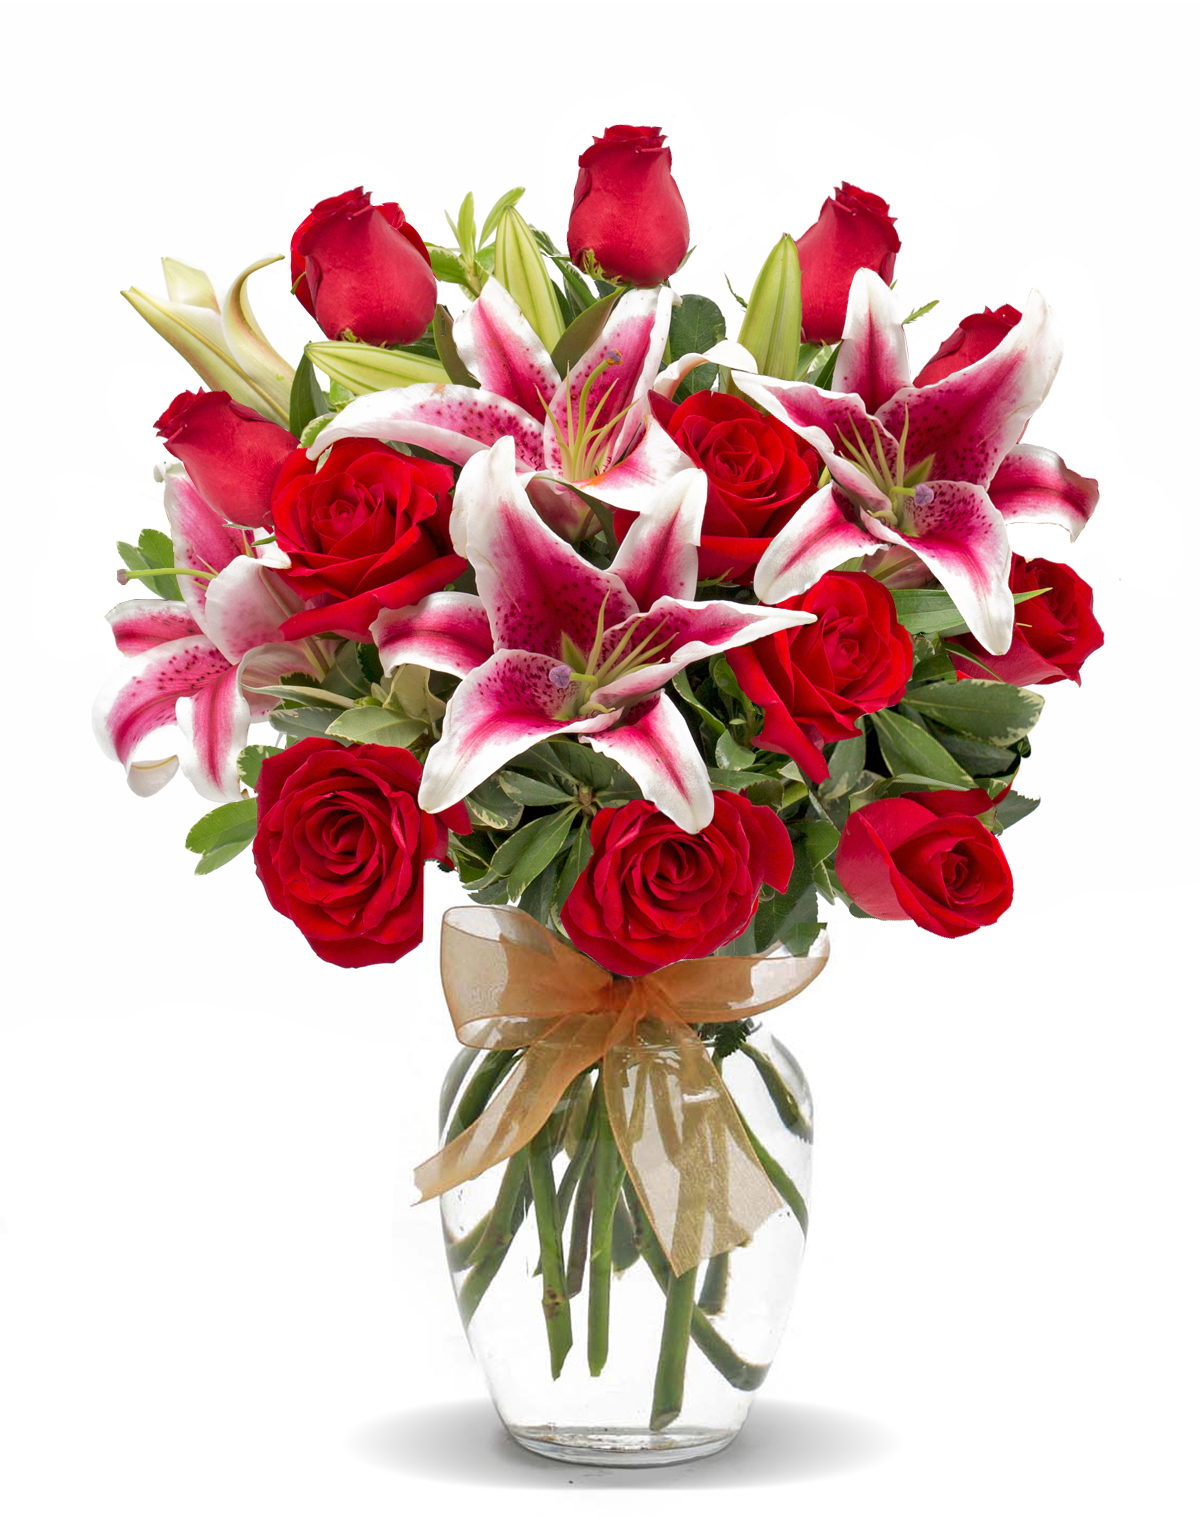 Valentines Day Roses Delivery : Red Roses for Valentine's Day | GlobalRose : Select from a variety of bouquets that symbolize beautiful sentiments, ranging from desire and passion to gratitude and friendship.